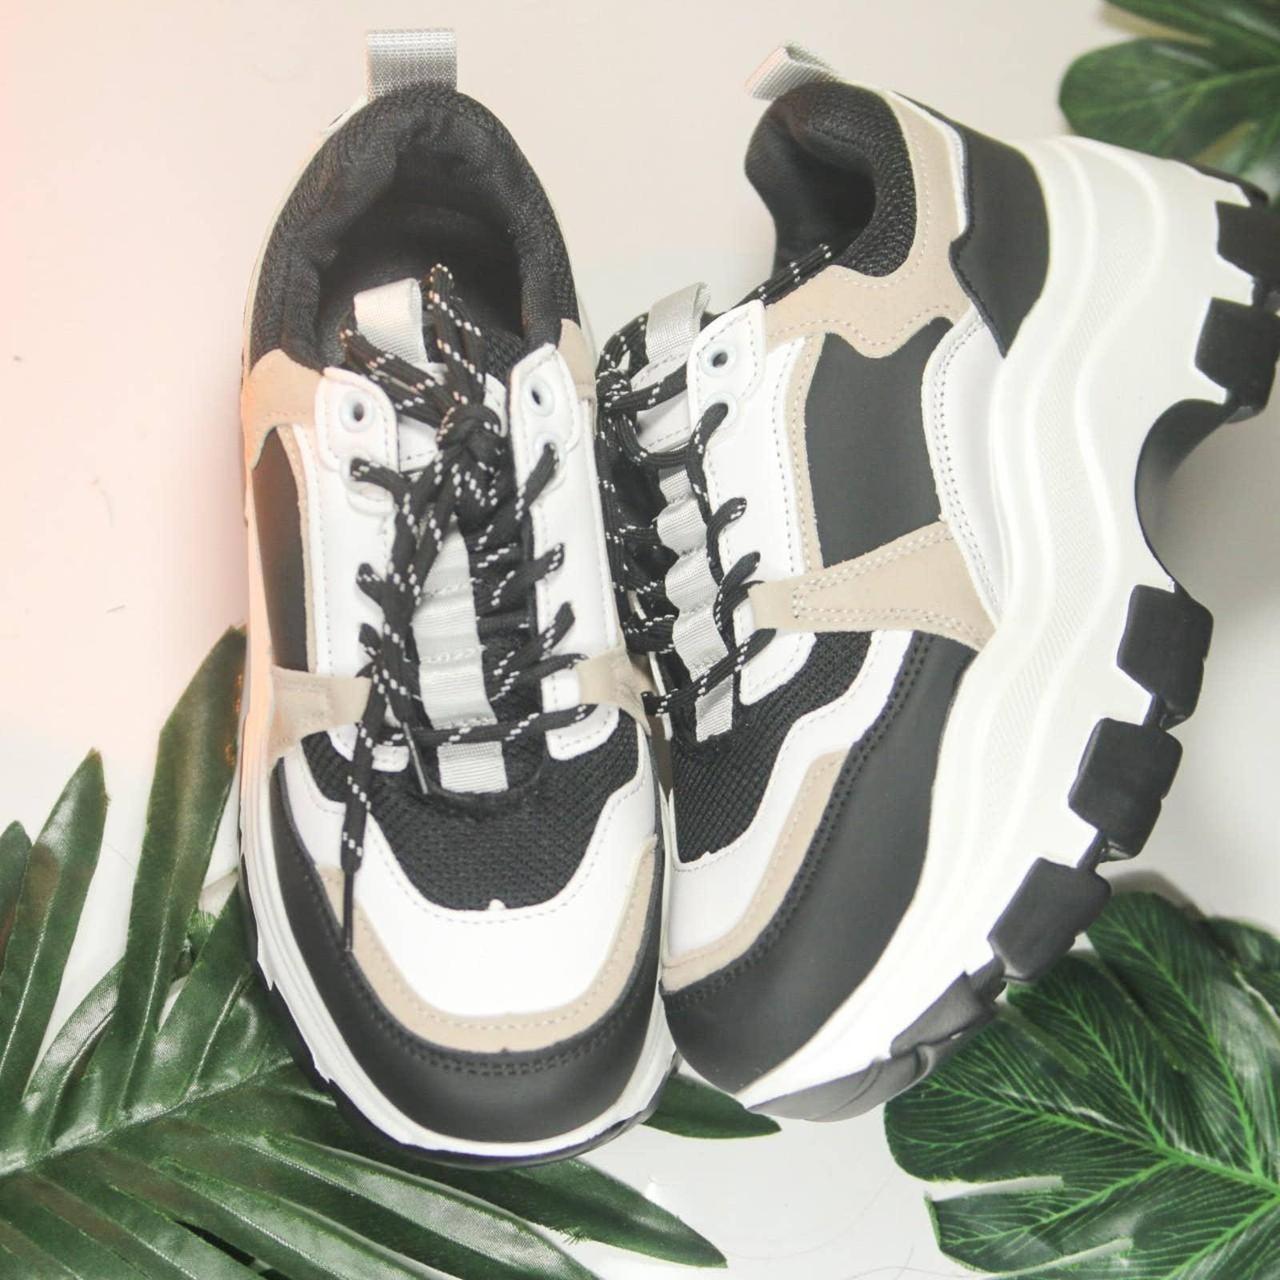 Product Image 2 - Name: Chunky Womens Platform Sneakers